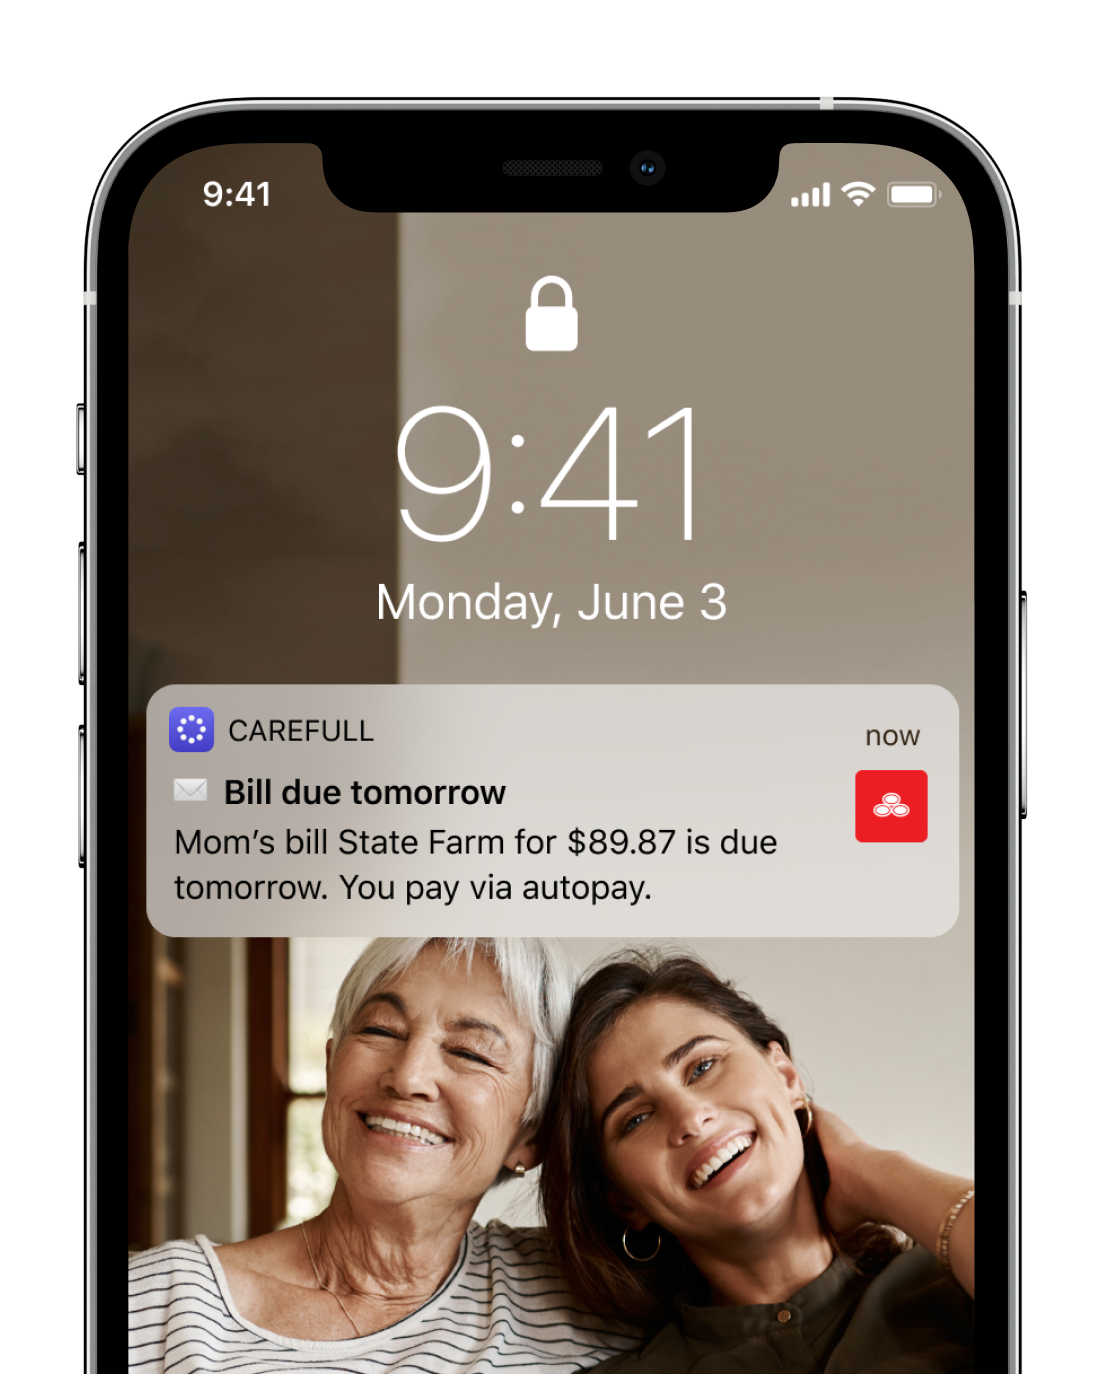 An iphone lockscreen with an alert that says 'Mom's bill State Famr for $89.87 is due tomorrow. You pay via autopay.'